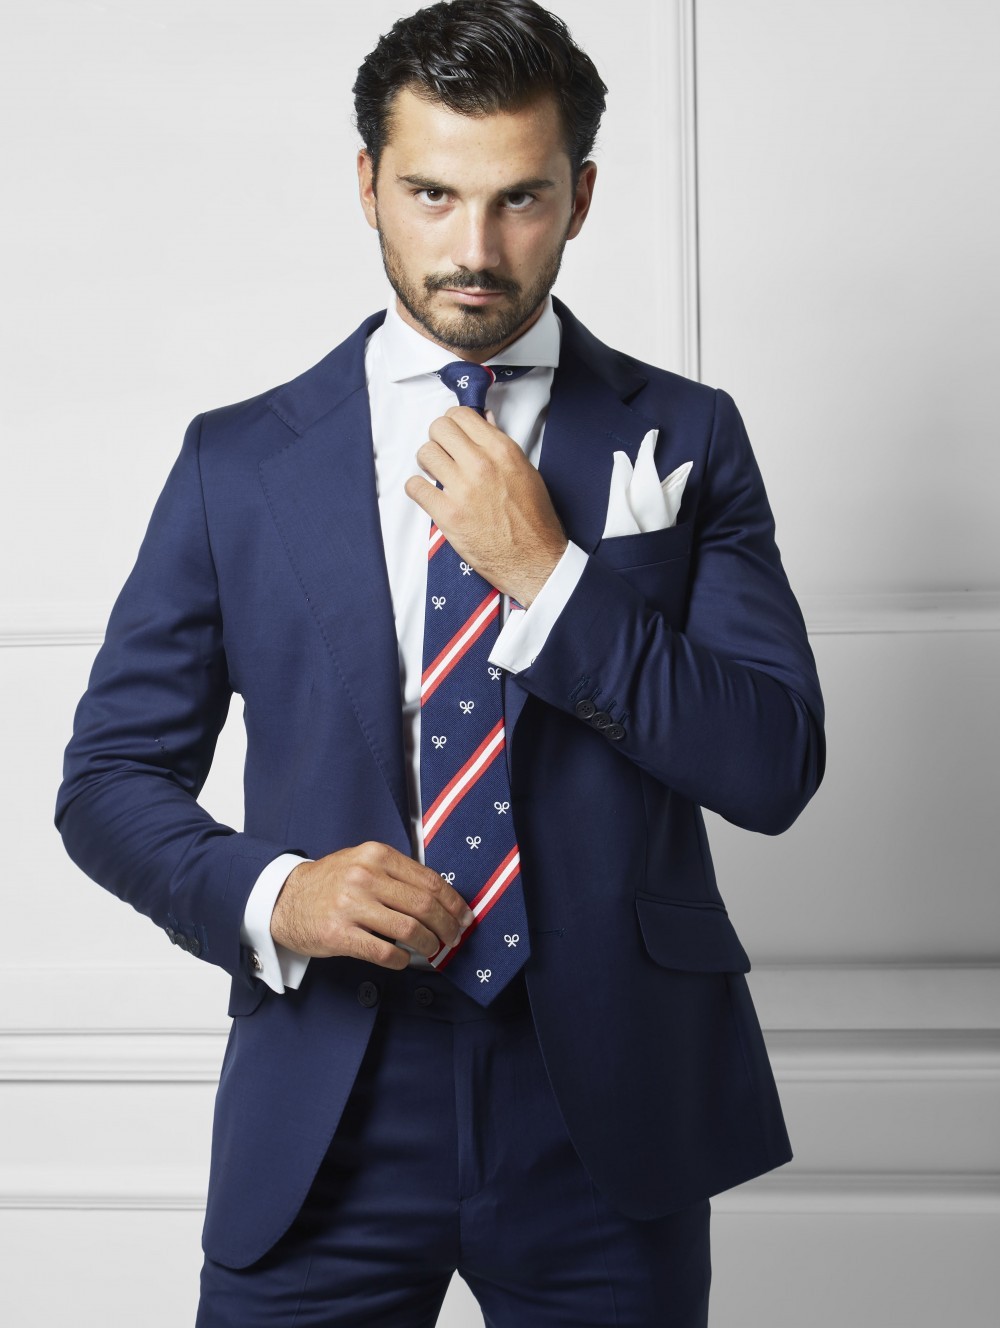 MALE MODELS IN SUITS: MANU MORAL for SILBÓN